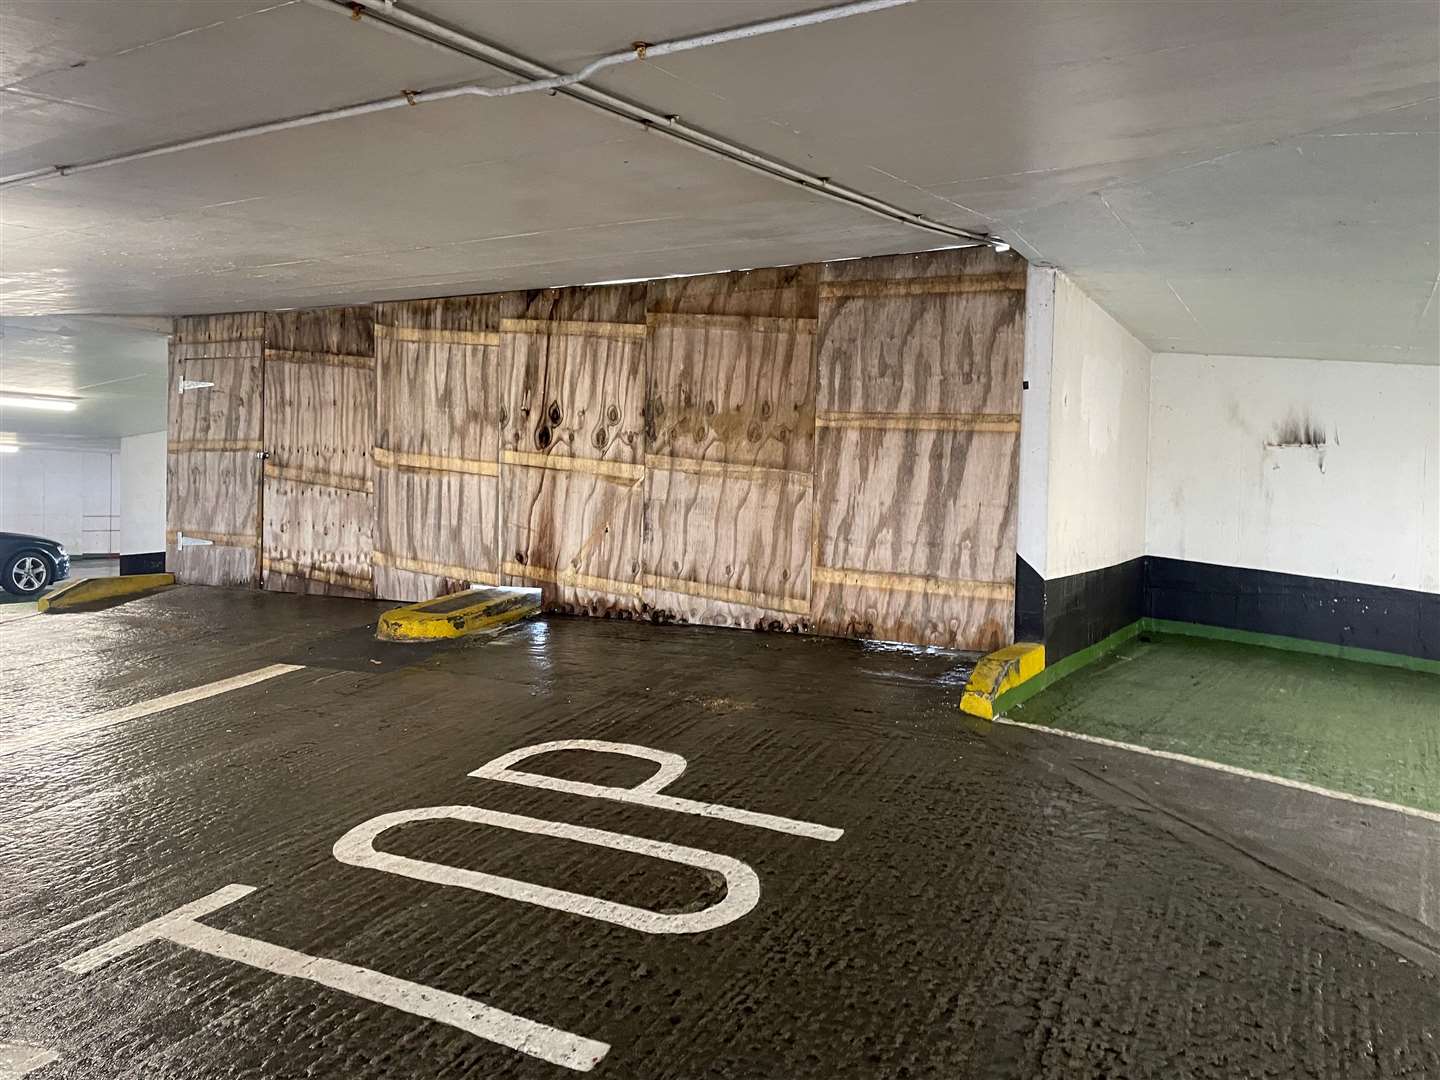 The ramp to the fourth floor of the car park has already been boarded up